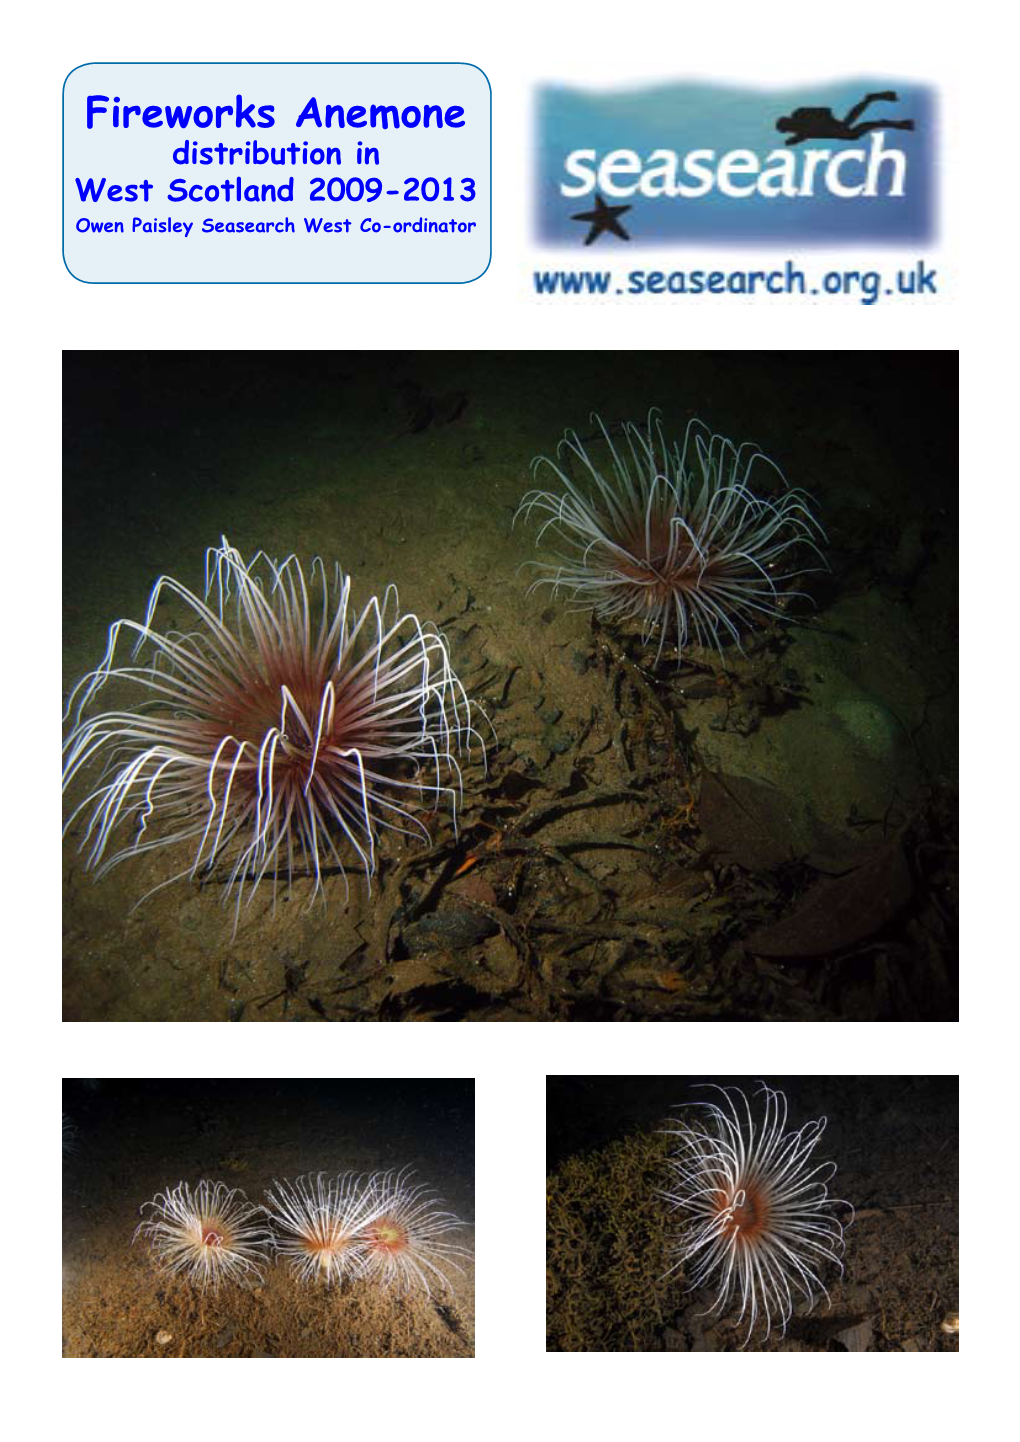 Fireworks Anemones Only a Limited Number of Other Species Were Recorded Along the Transects